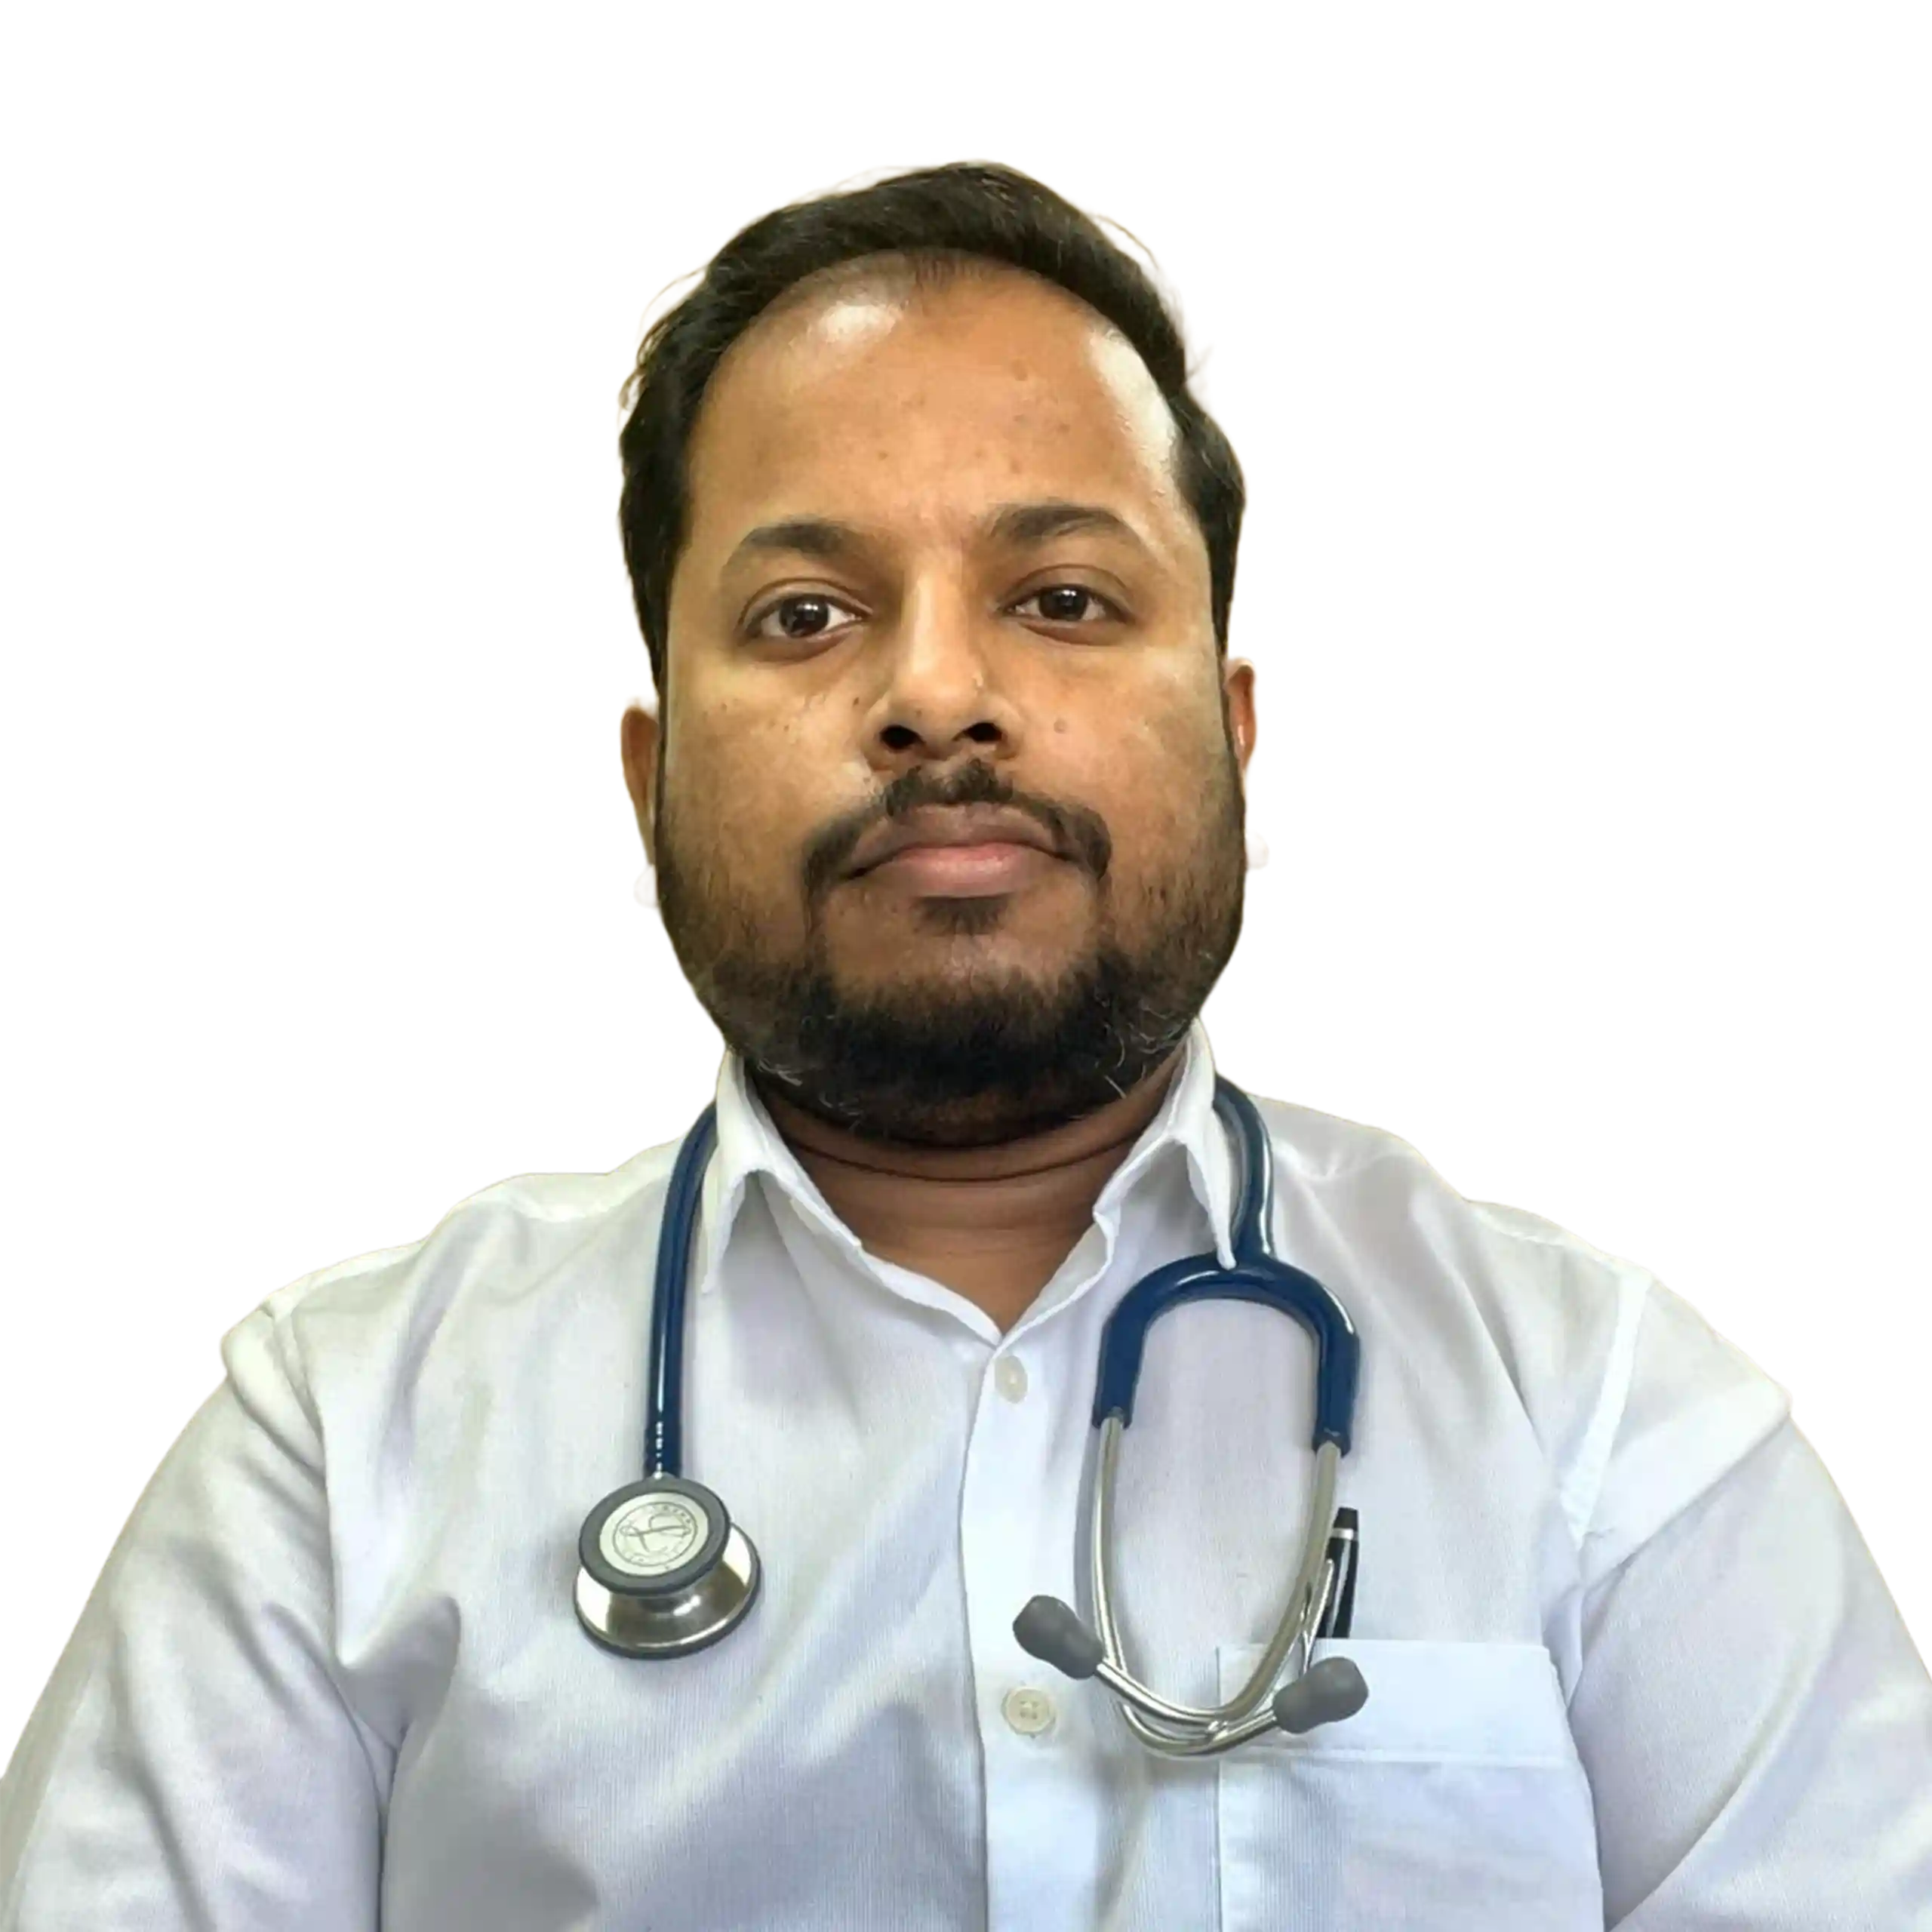 Dr. Siddharth Anand